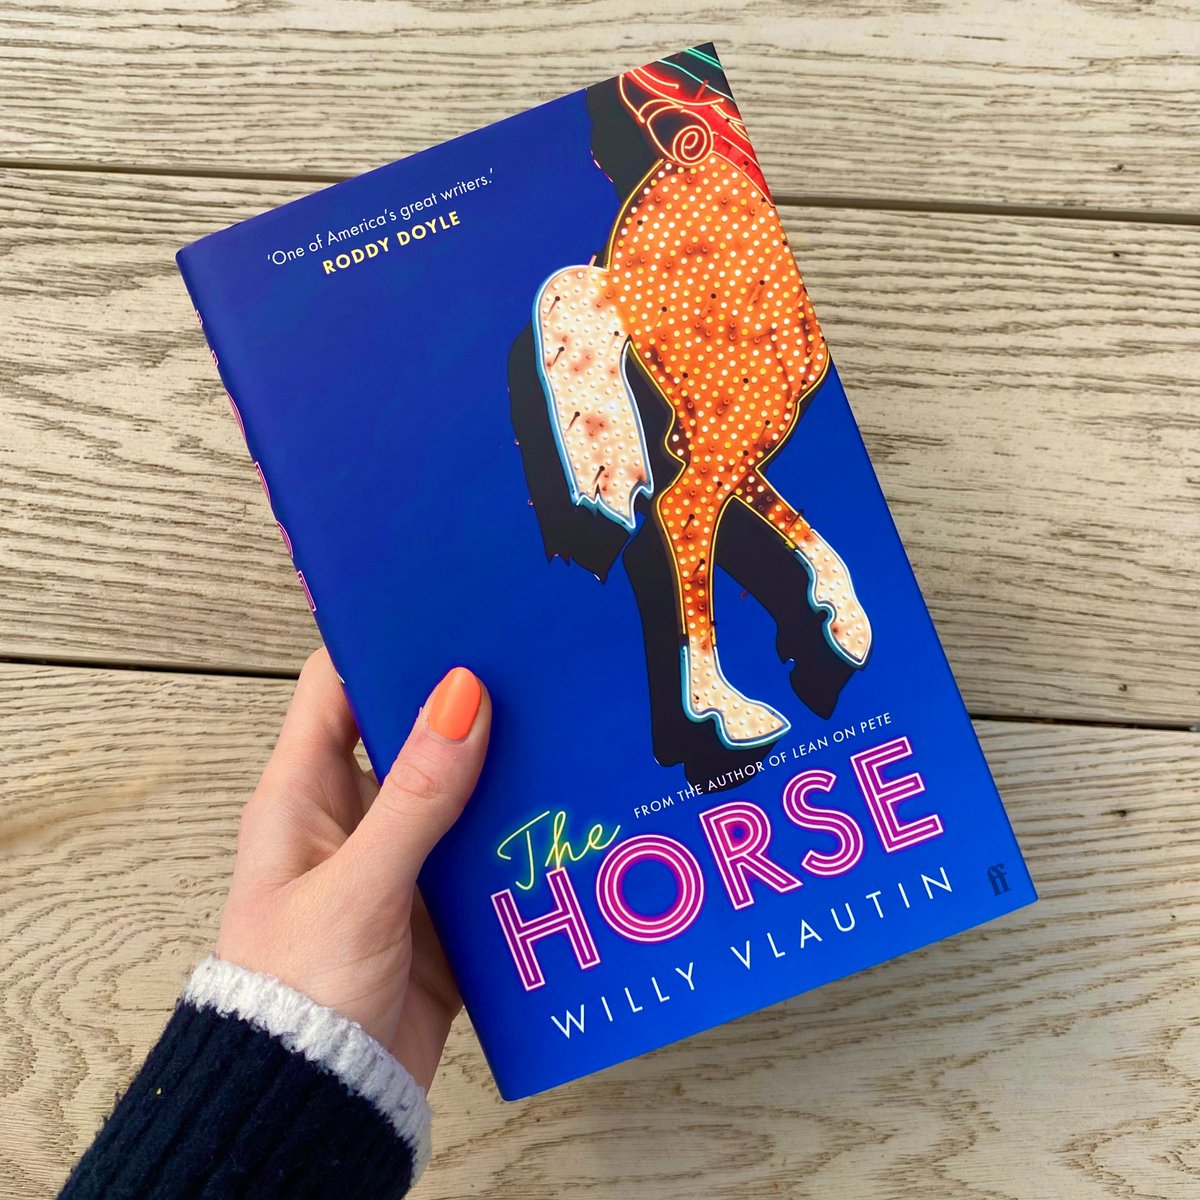 🐎 'Both a work of extraordinary compassion and a really great novel.' Ann Patchett 🐎 'A bruised and beautiful instant classic.' Ben Myers The Horse by Willy Vlautin is a poetic, deeply moving story about what it really takes to be a musician. One to watch, out next week.